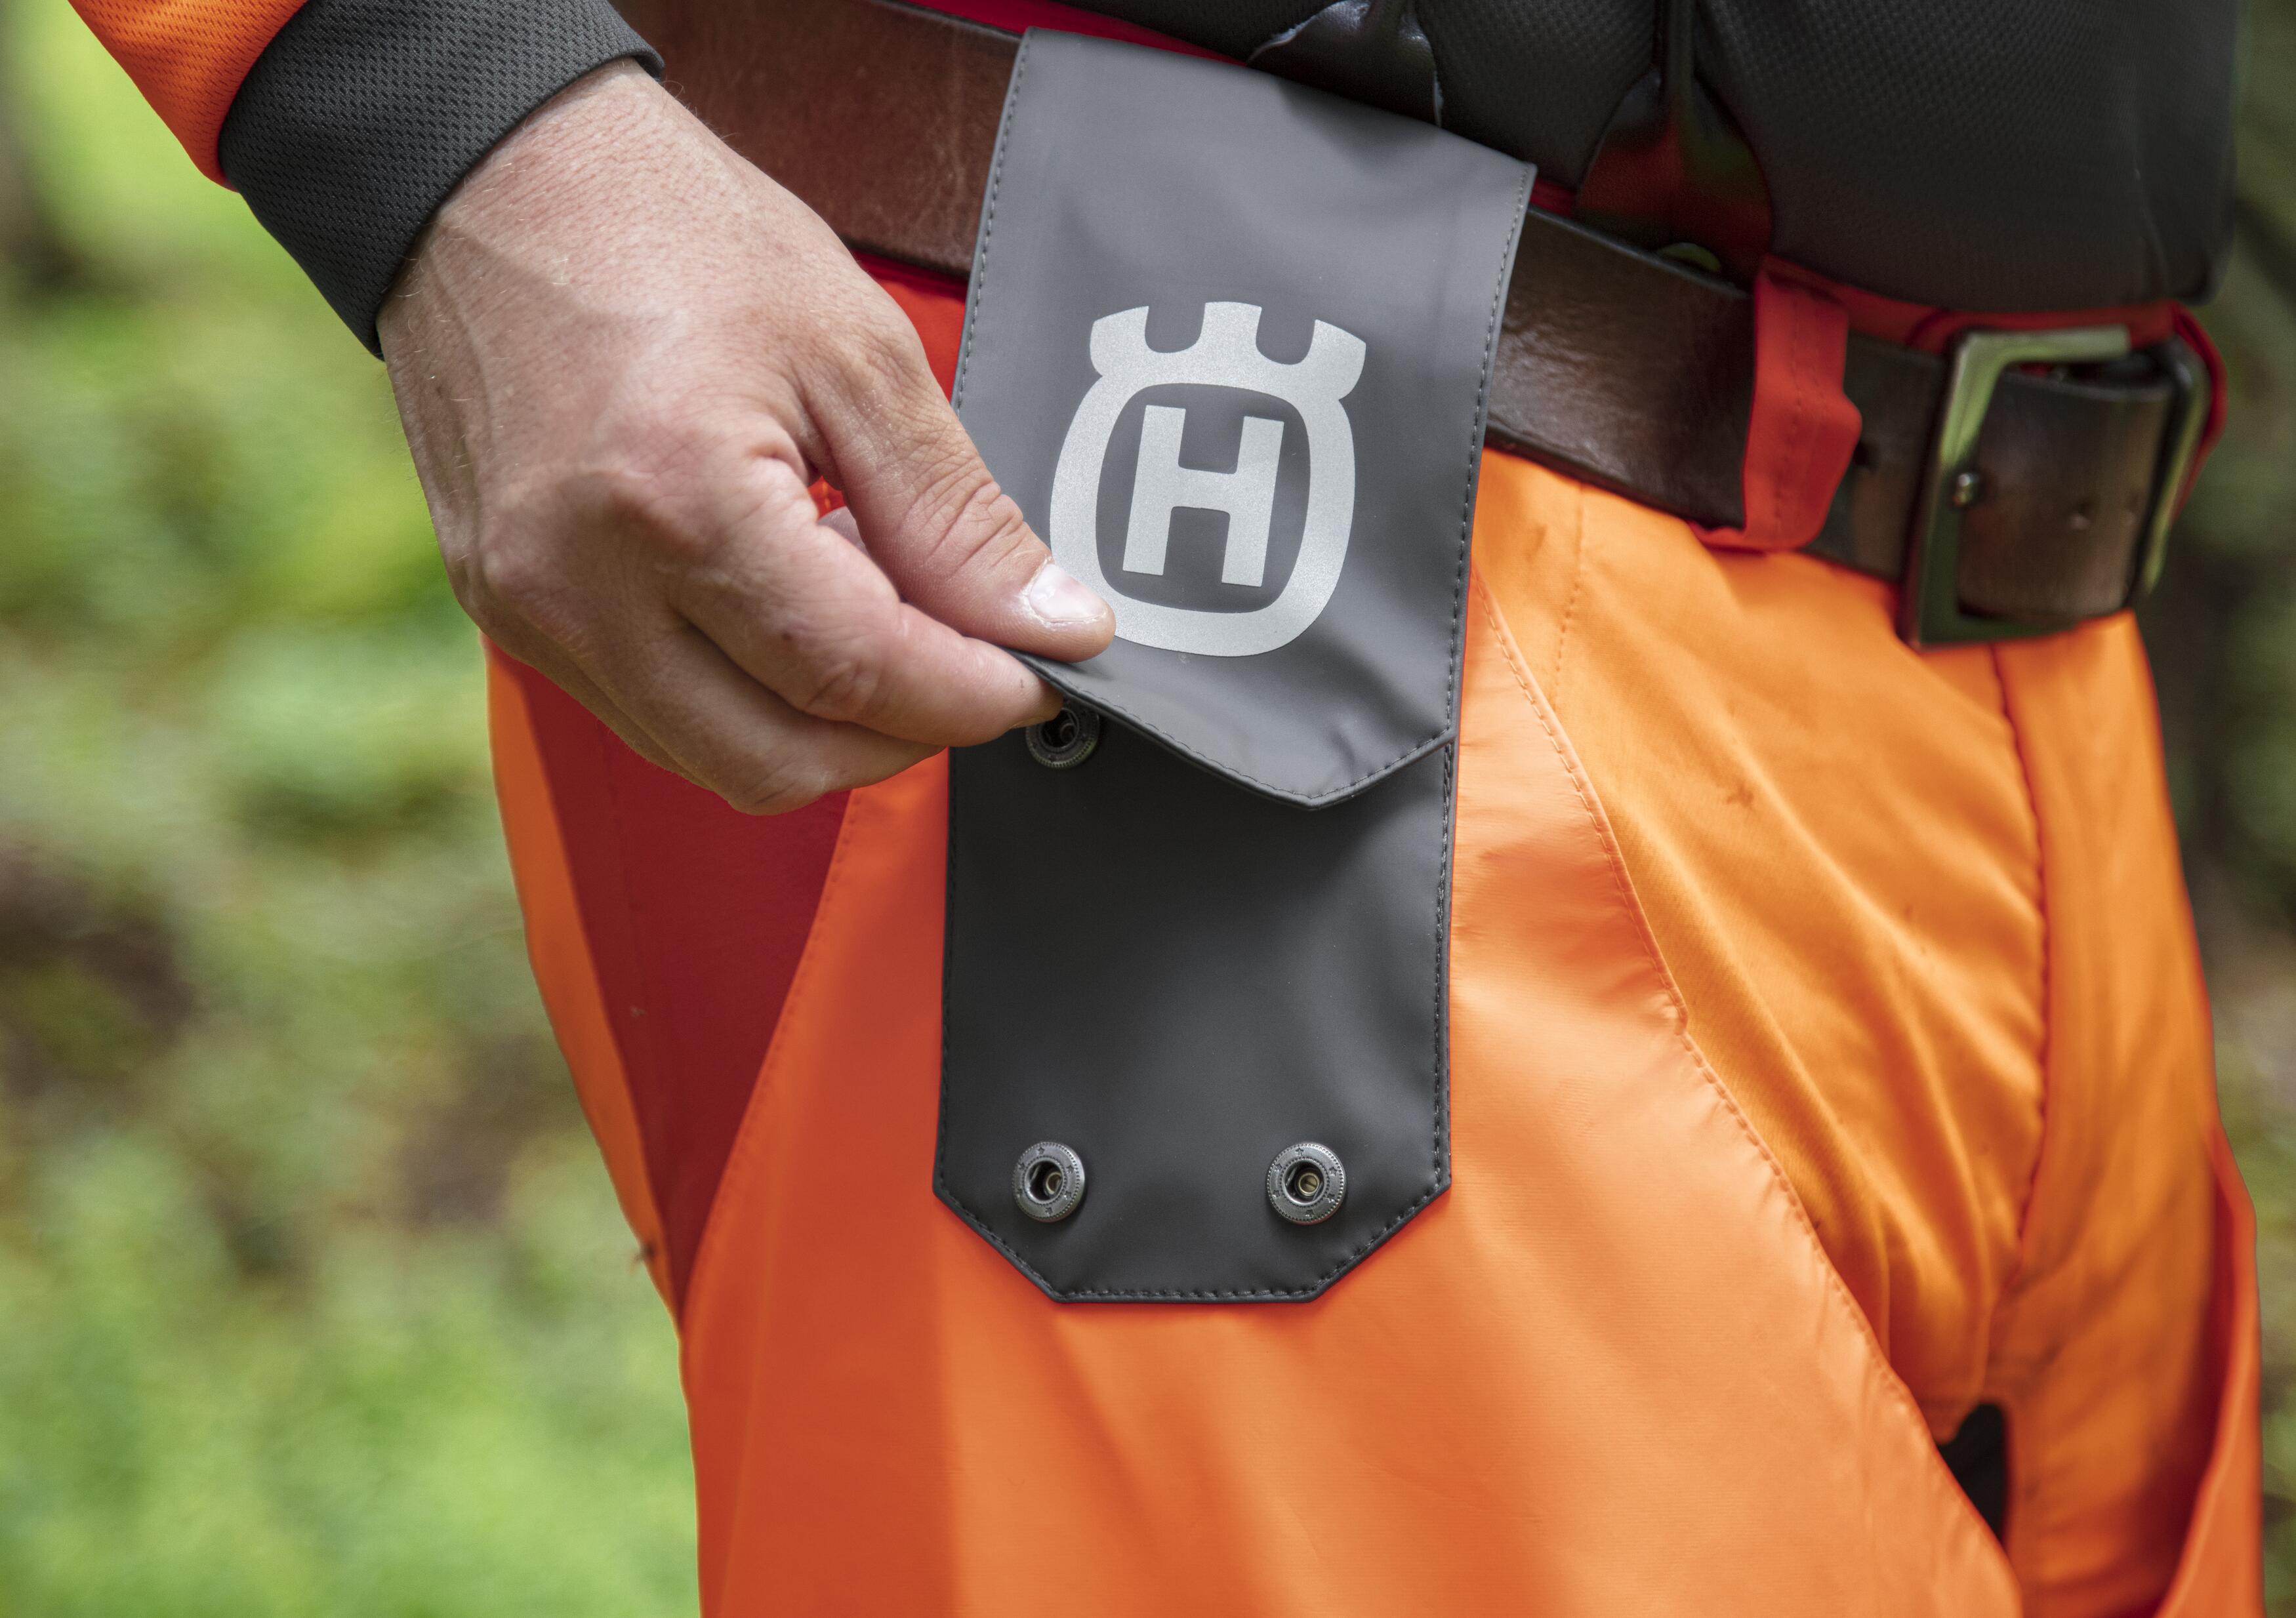 Rain Chaps Protect High-Viz, Functional, Attachment to Trousers